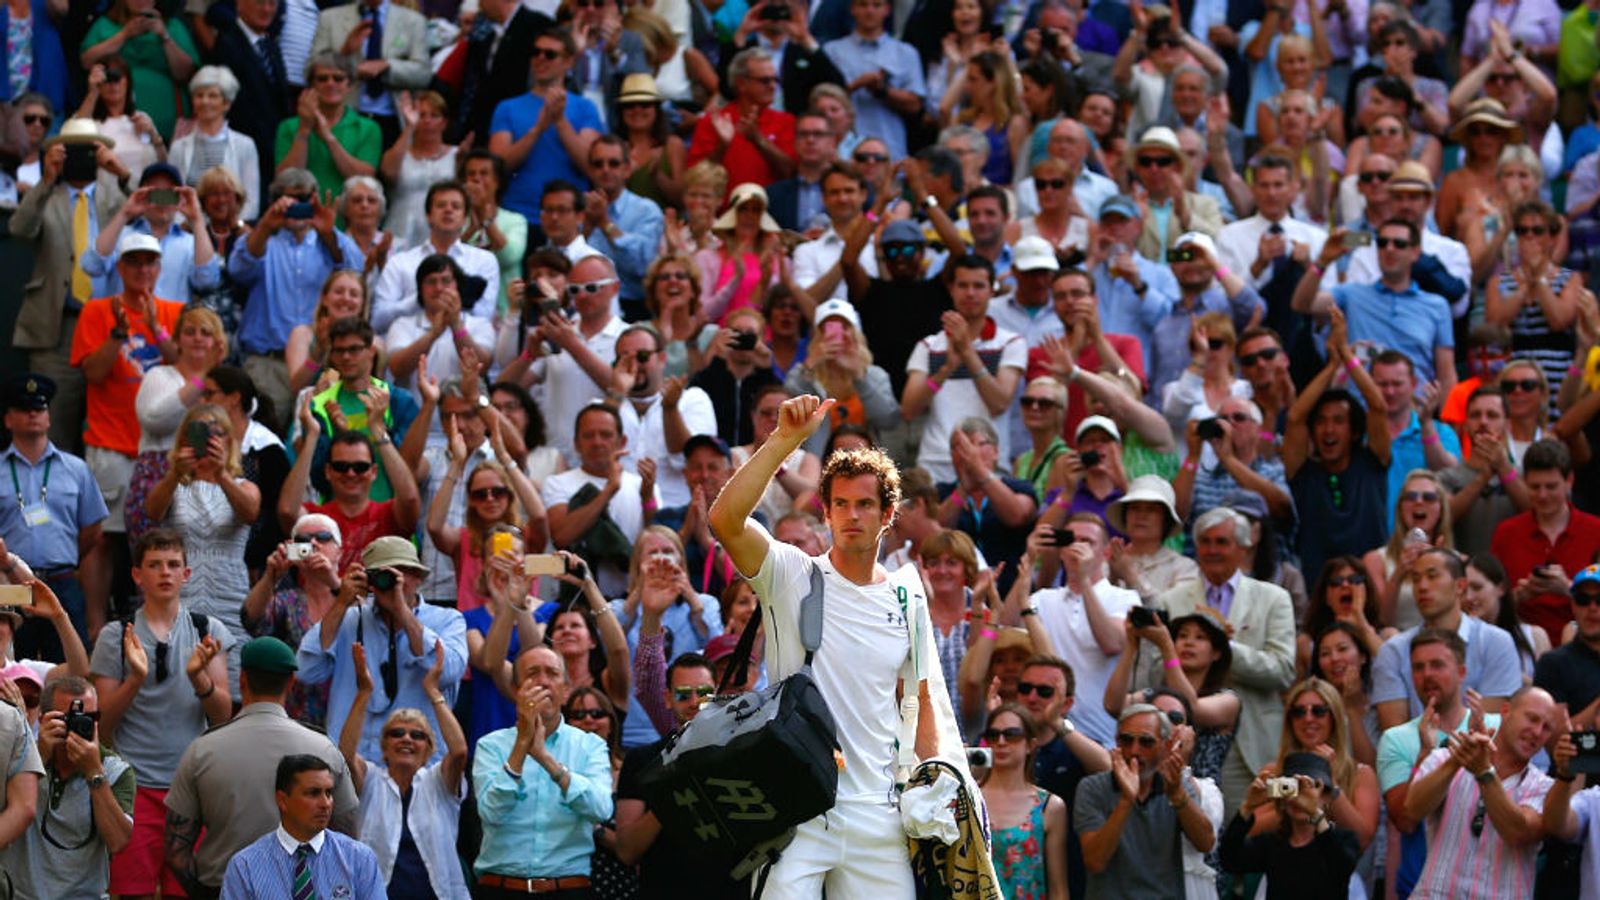 Wimbledon Andy Murray, Roger Federer and, Novak Djokovic in action on